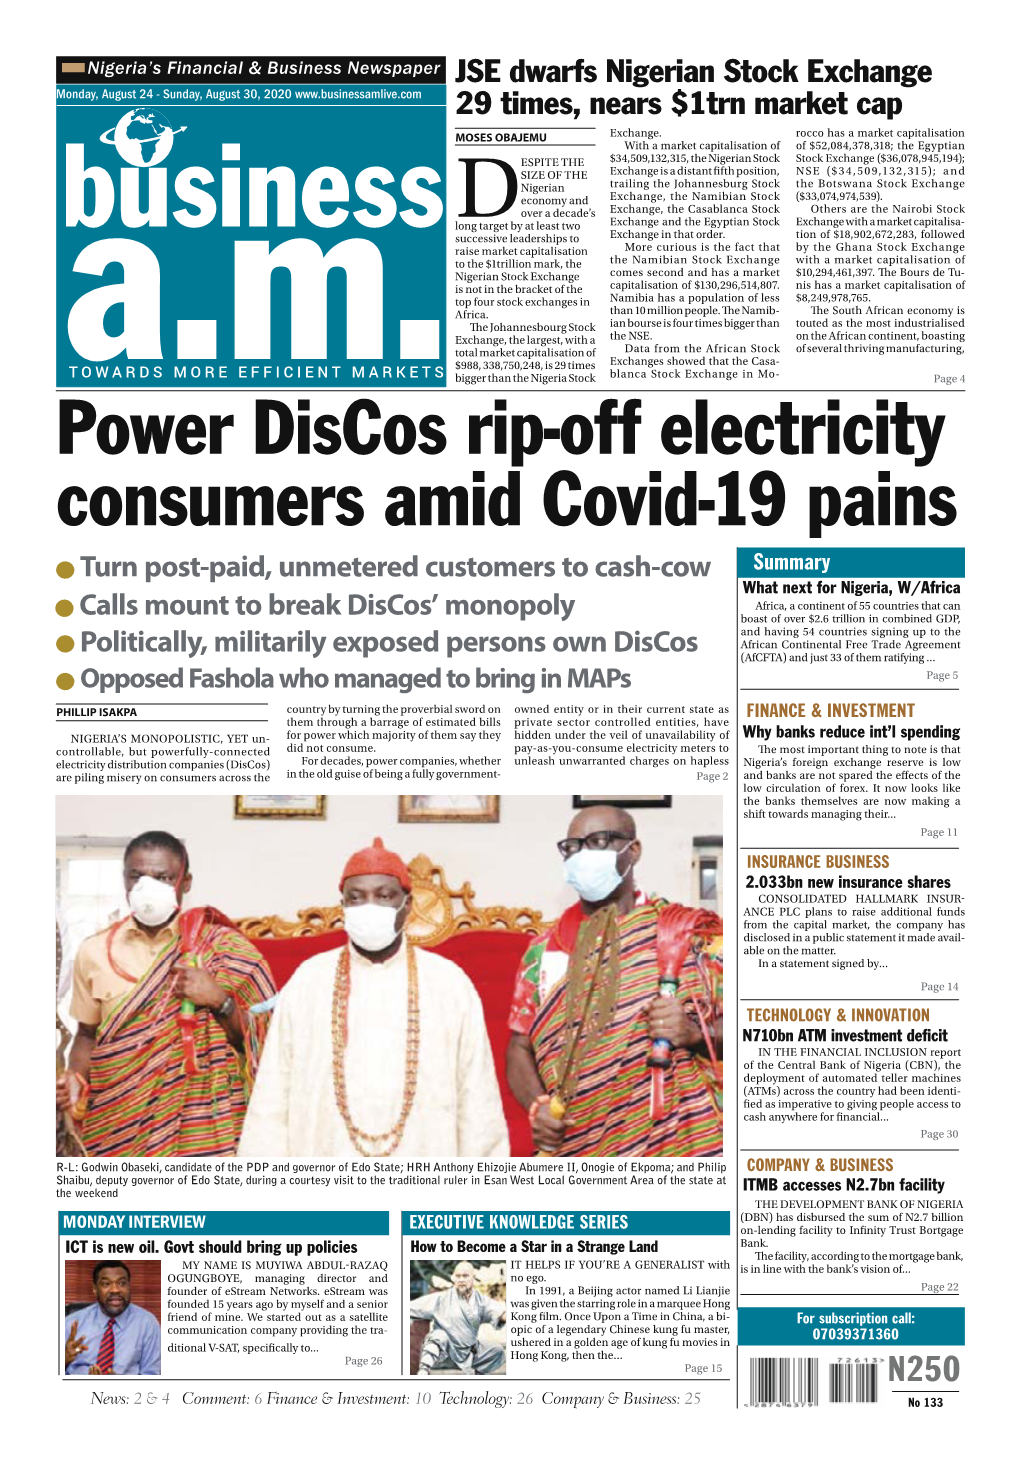 Power Discos Rip-Off Electricity Consumers Amid Covid-19 Pains